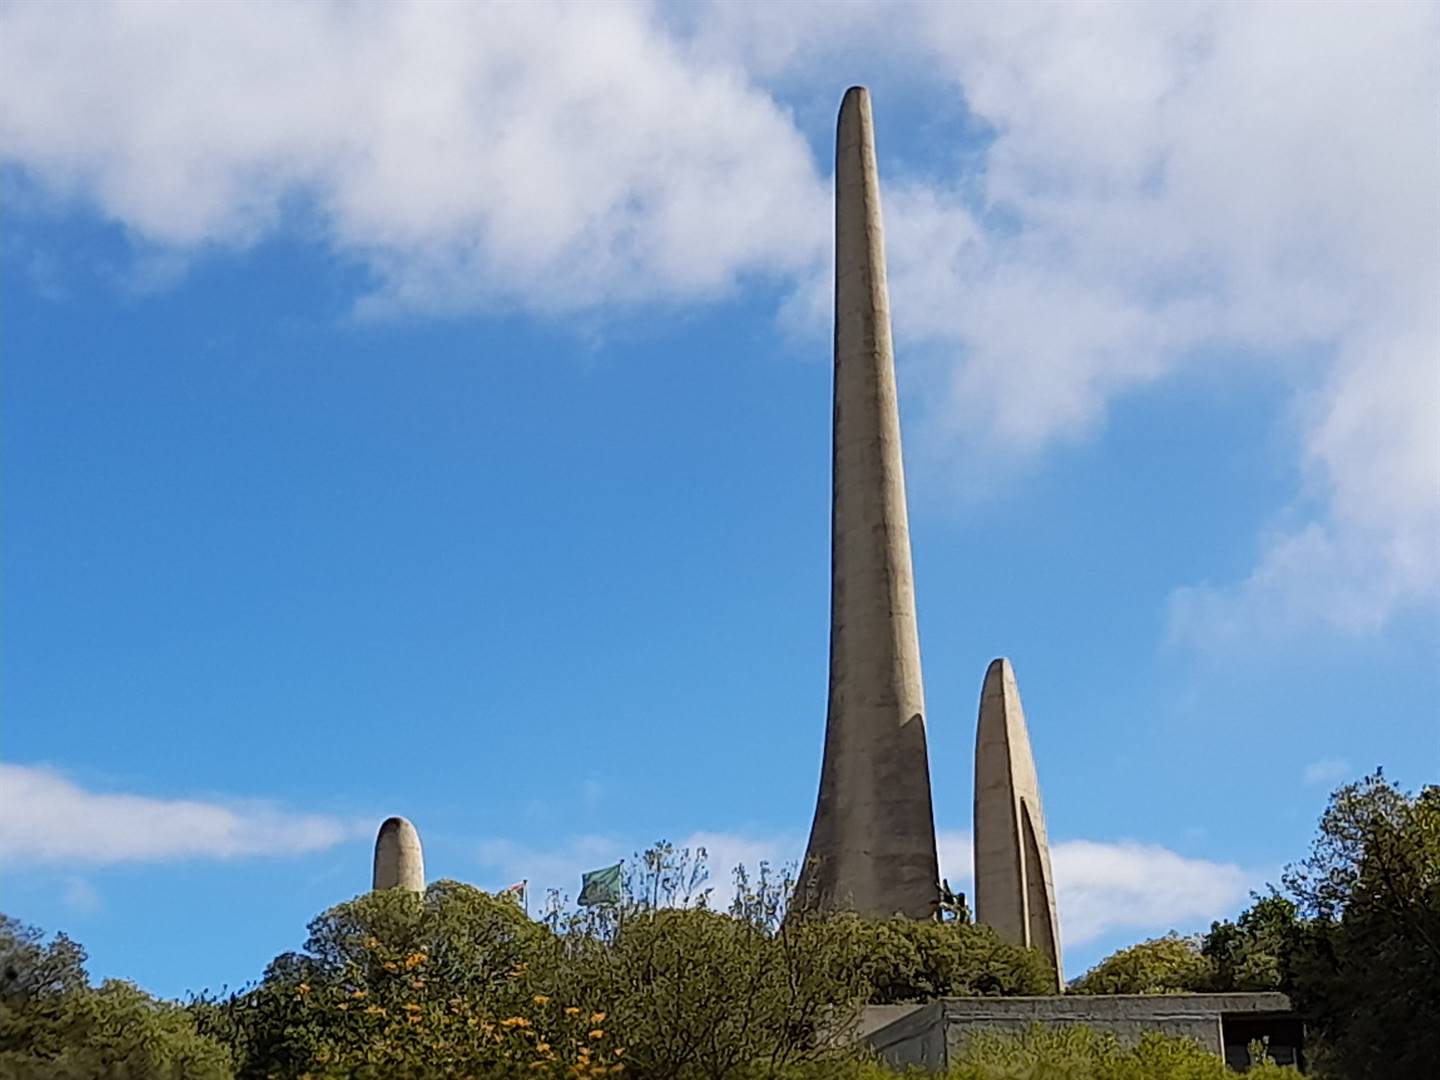 The Afrikaans monument in Paarl. Photo: Malherbe Nienaber